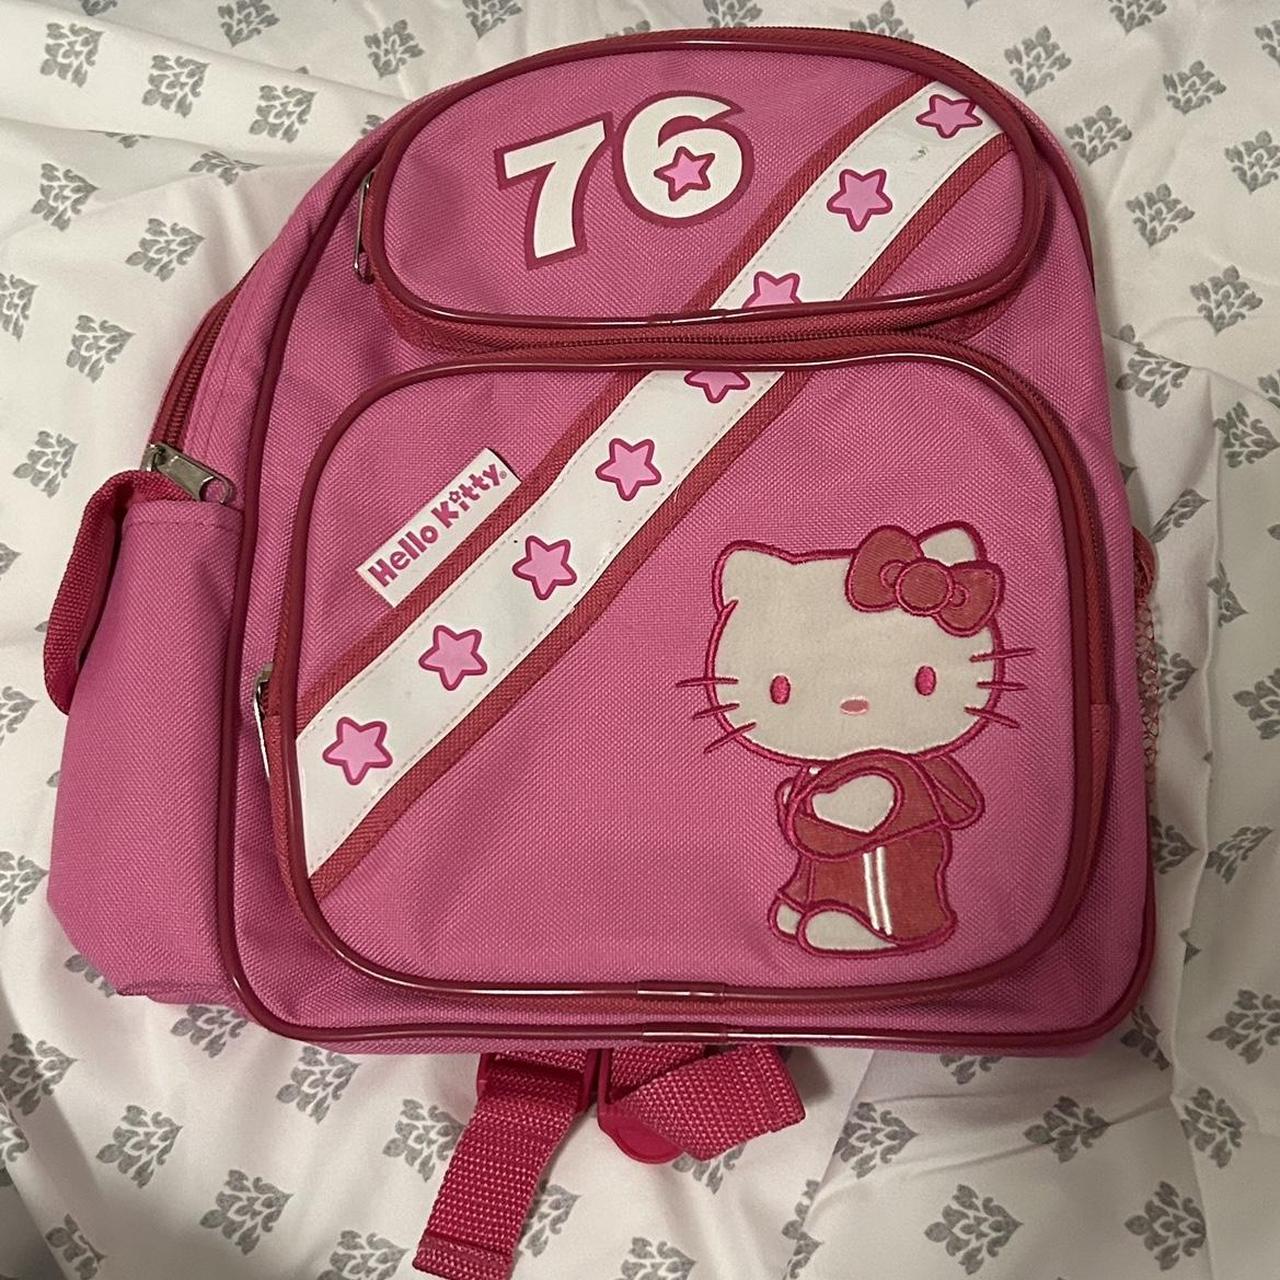 2004 Sanrio hello kitty backpack! For kids and... - Depop